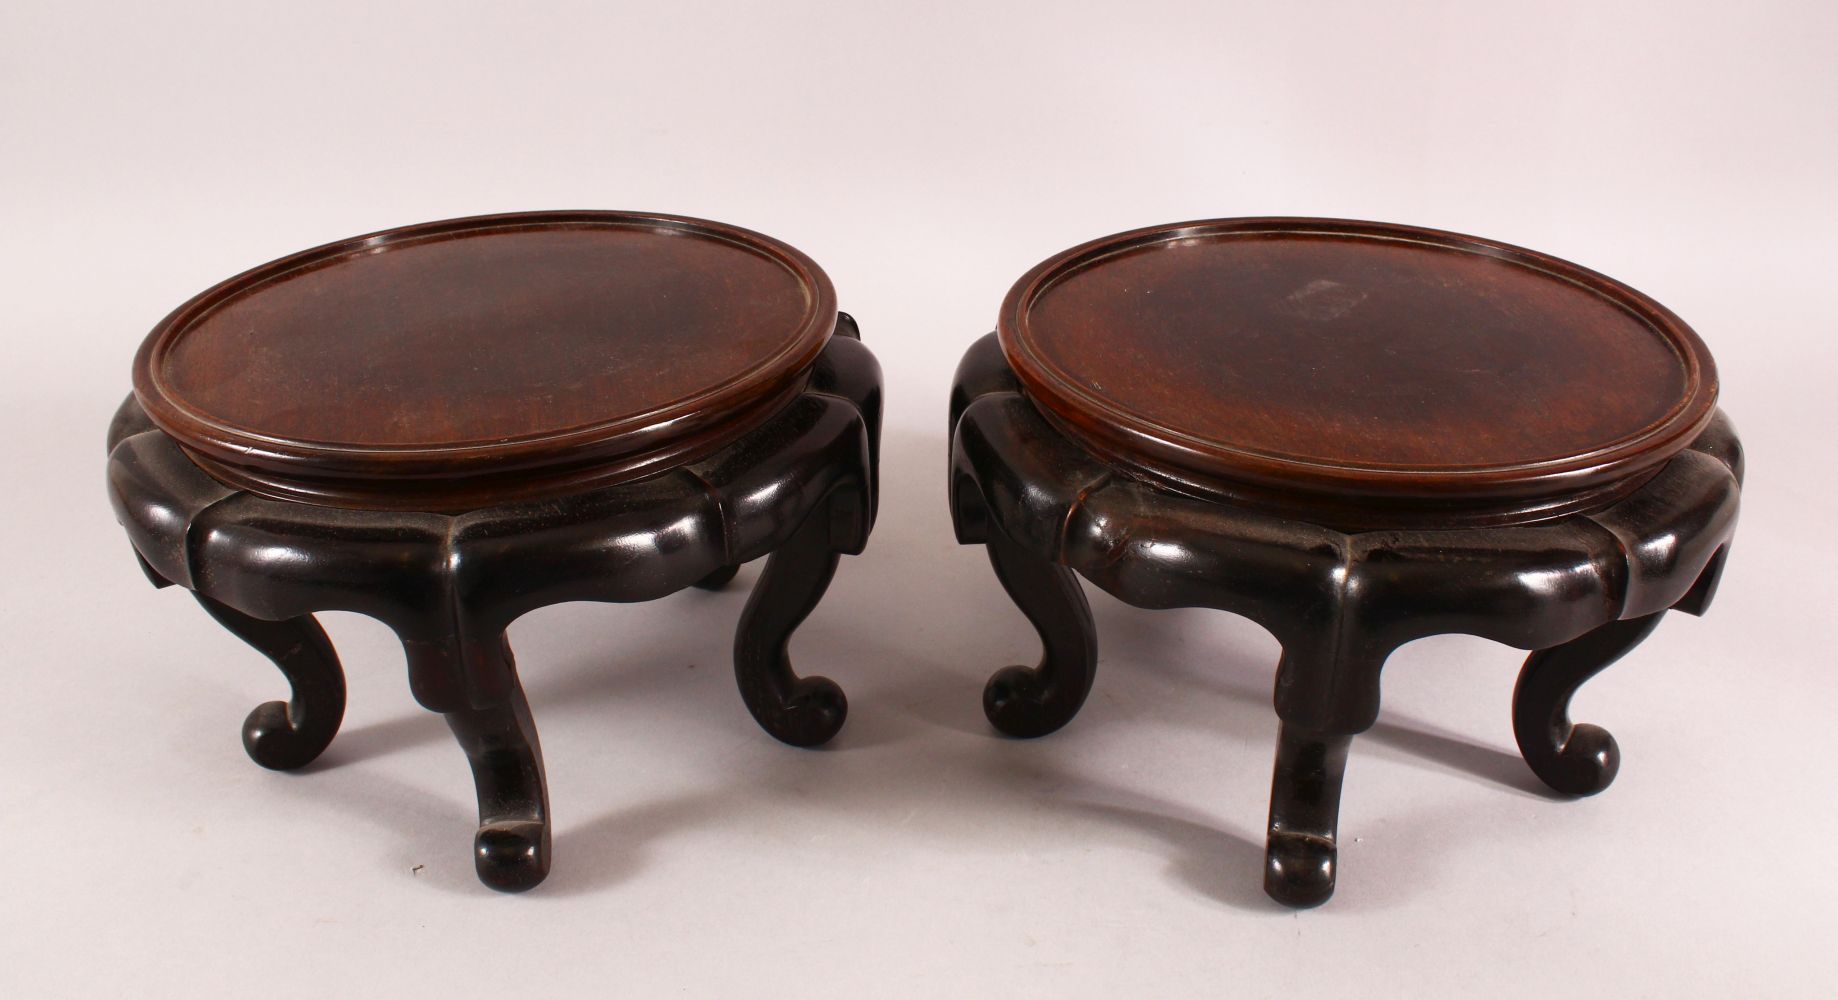 A PAIR OF 19TH CENTURY CHINESE CARVED HARDWOOD STANDS. each with five curving feet, 26cm wide